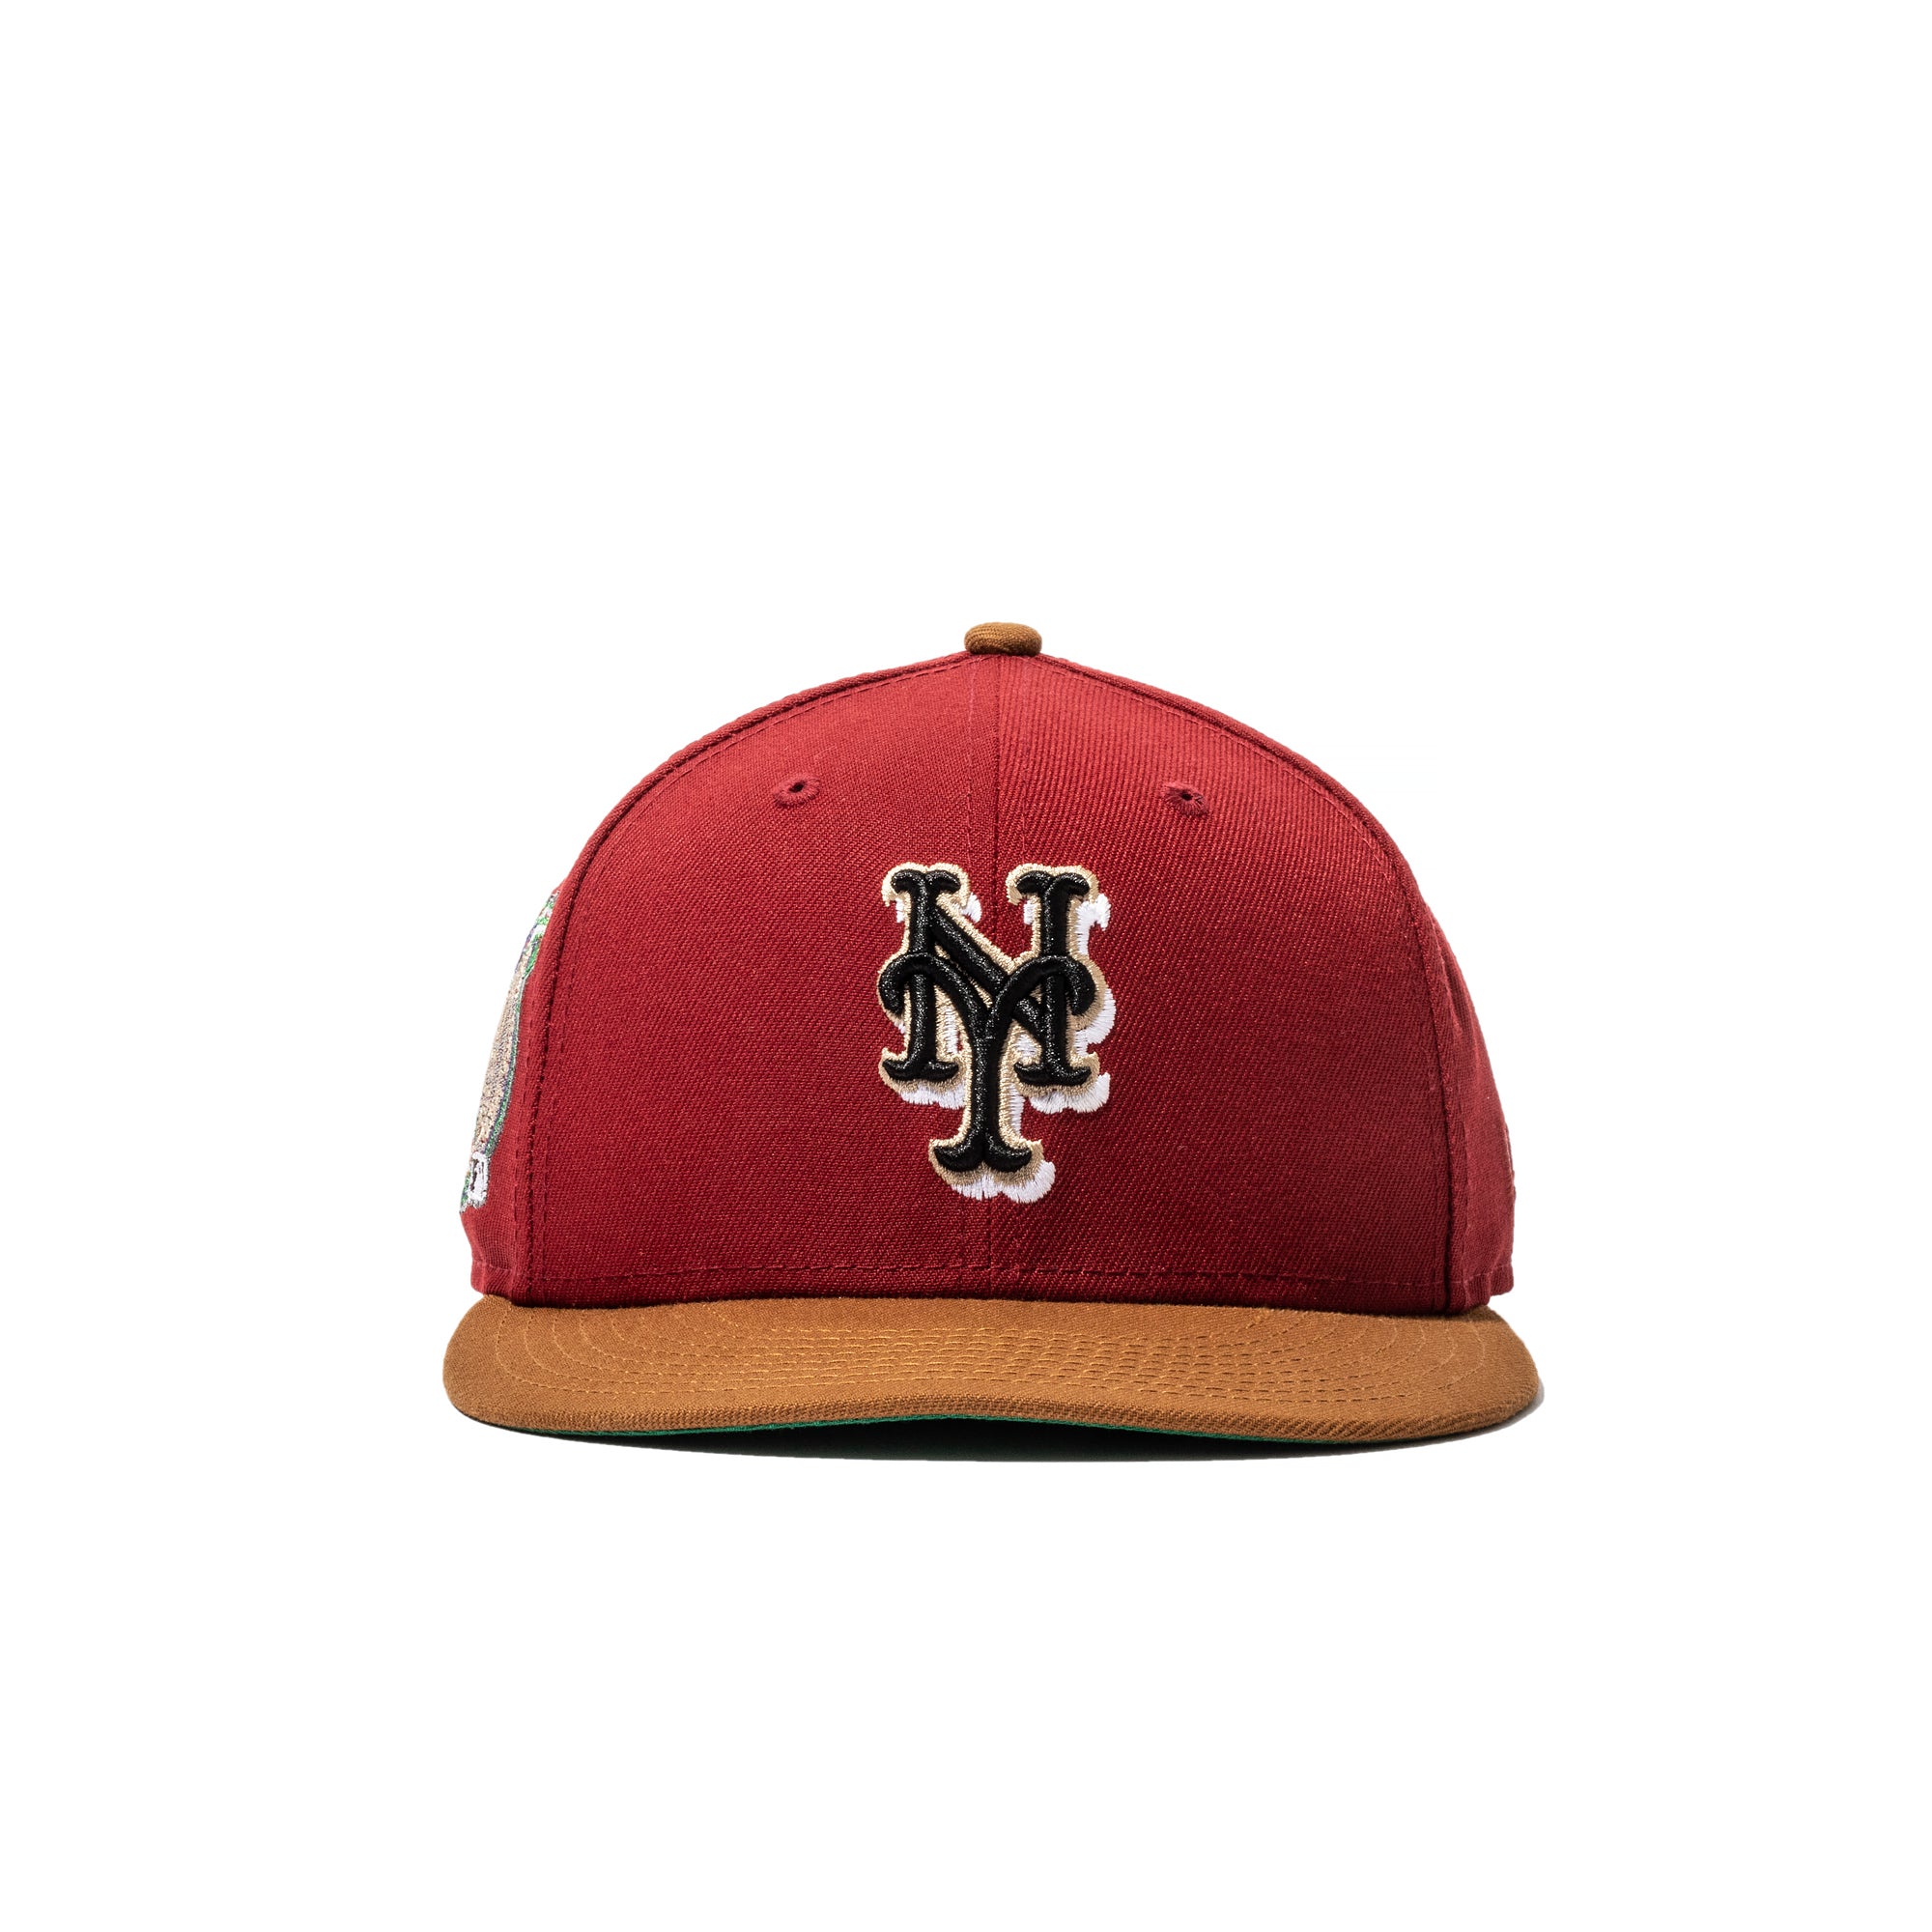 New Era 59FIFTY New York Mets Subway Series Fitted Hat